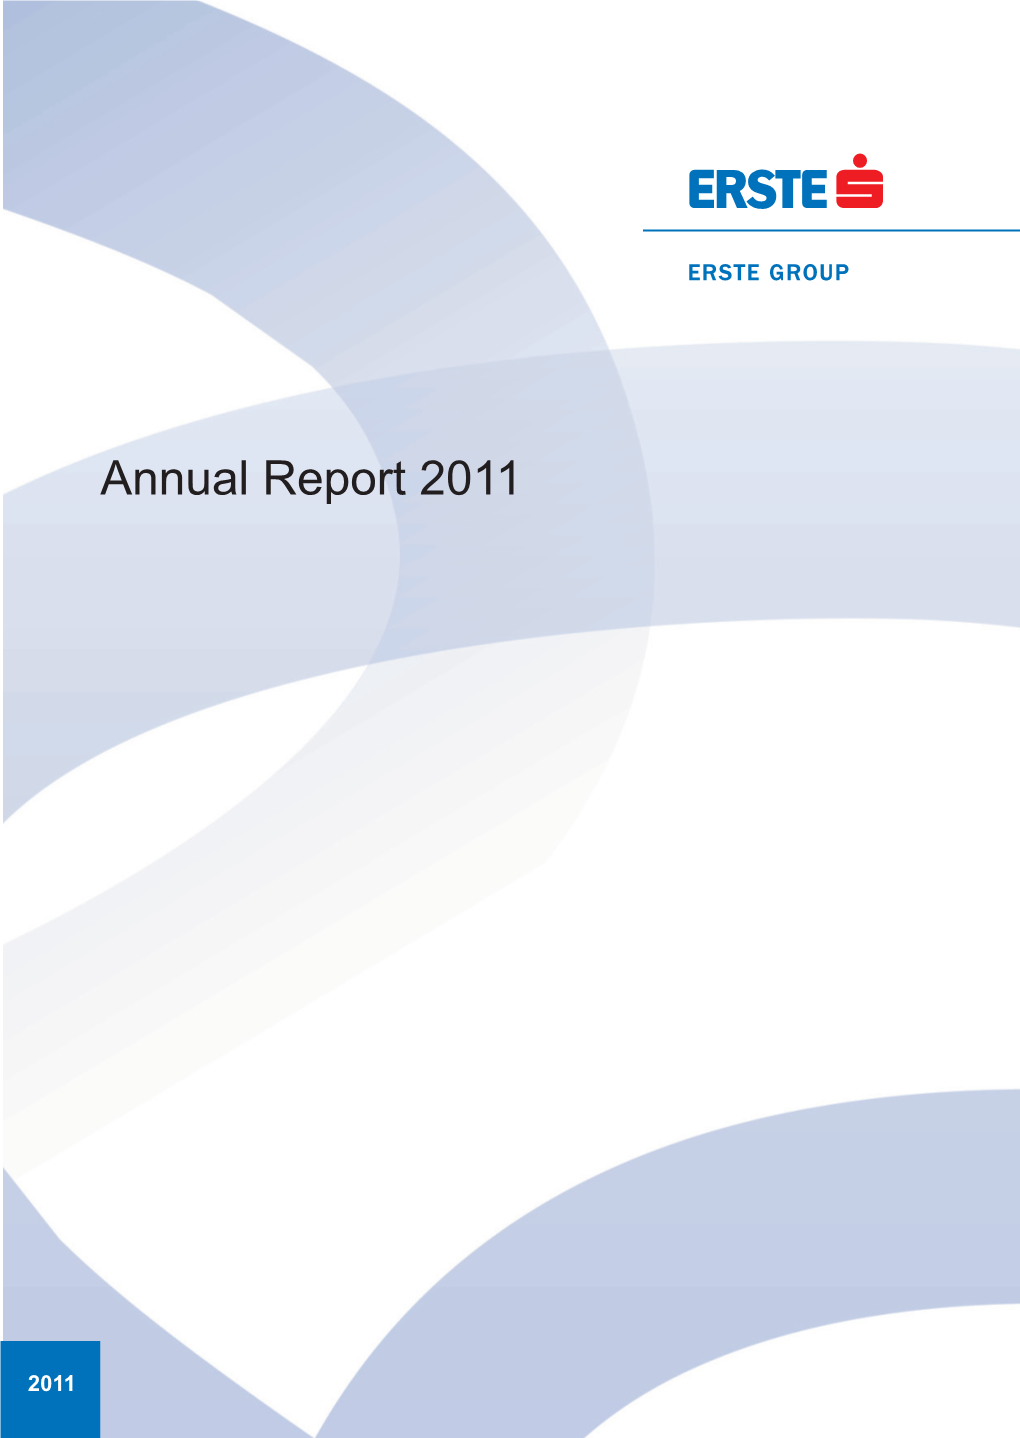 Annual Report 2011 Extensive Presence in Central and Eastern Europe